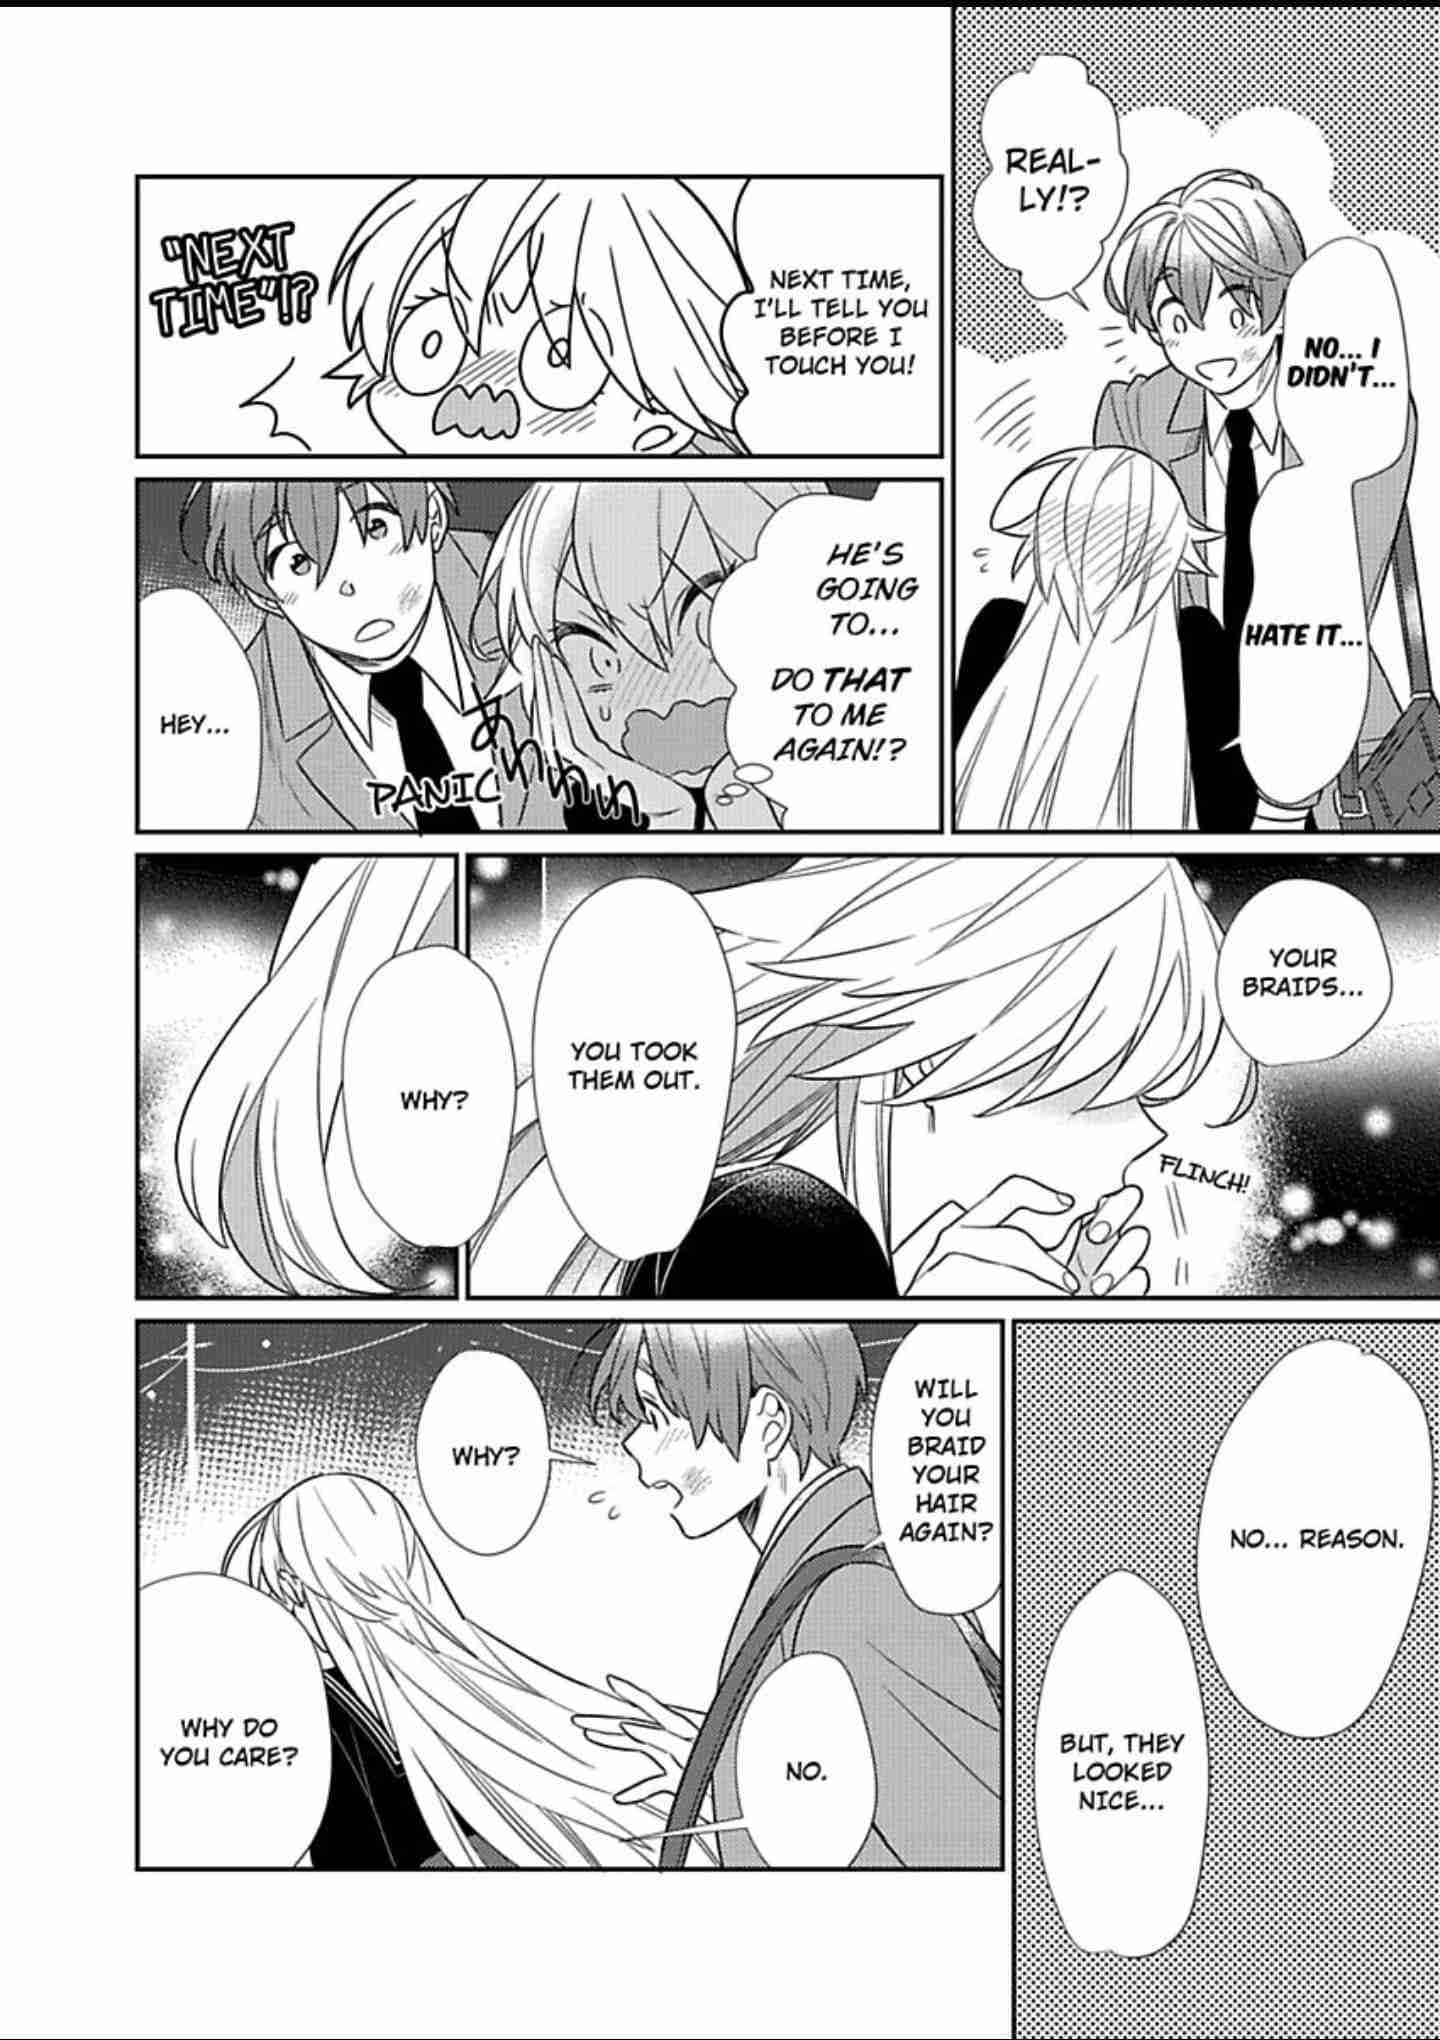 That Unexpected Side to my Childhood Friend -Watch Out for the Animal in Him! Vol.1 Ch.2